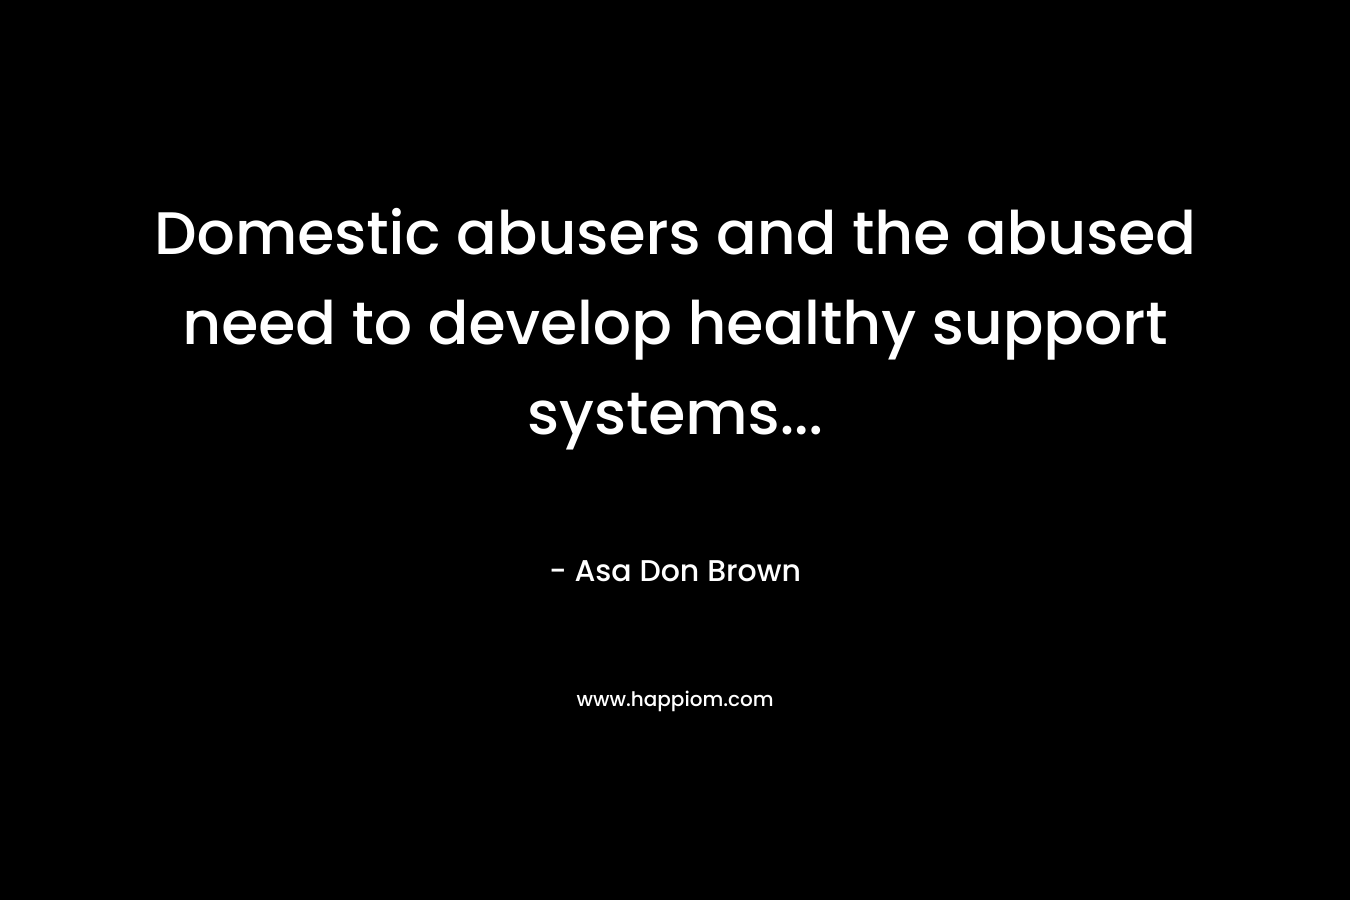 Domestic abusers and the abused need to develop healthy support systems...